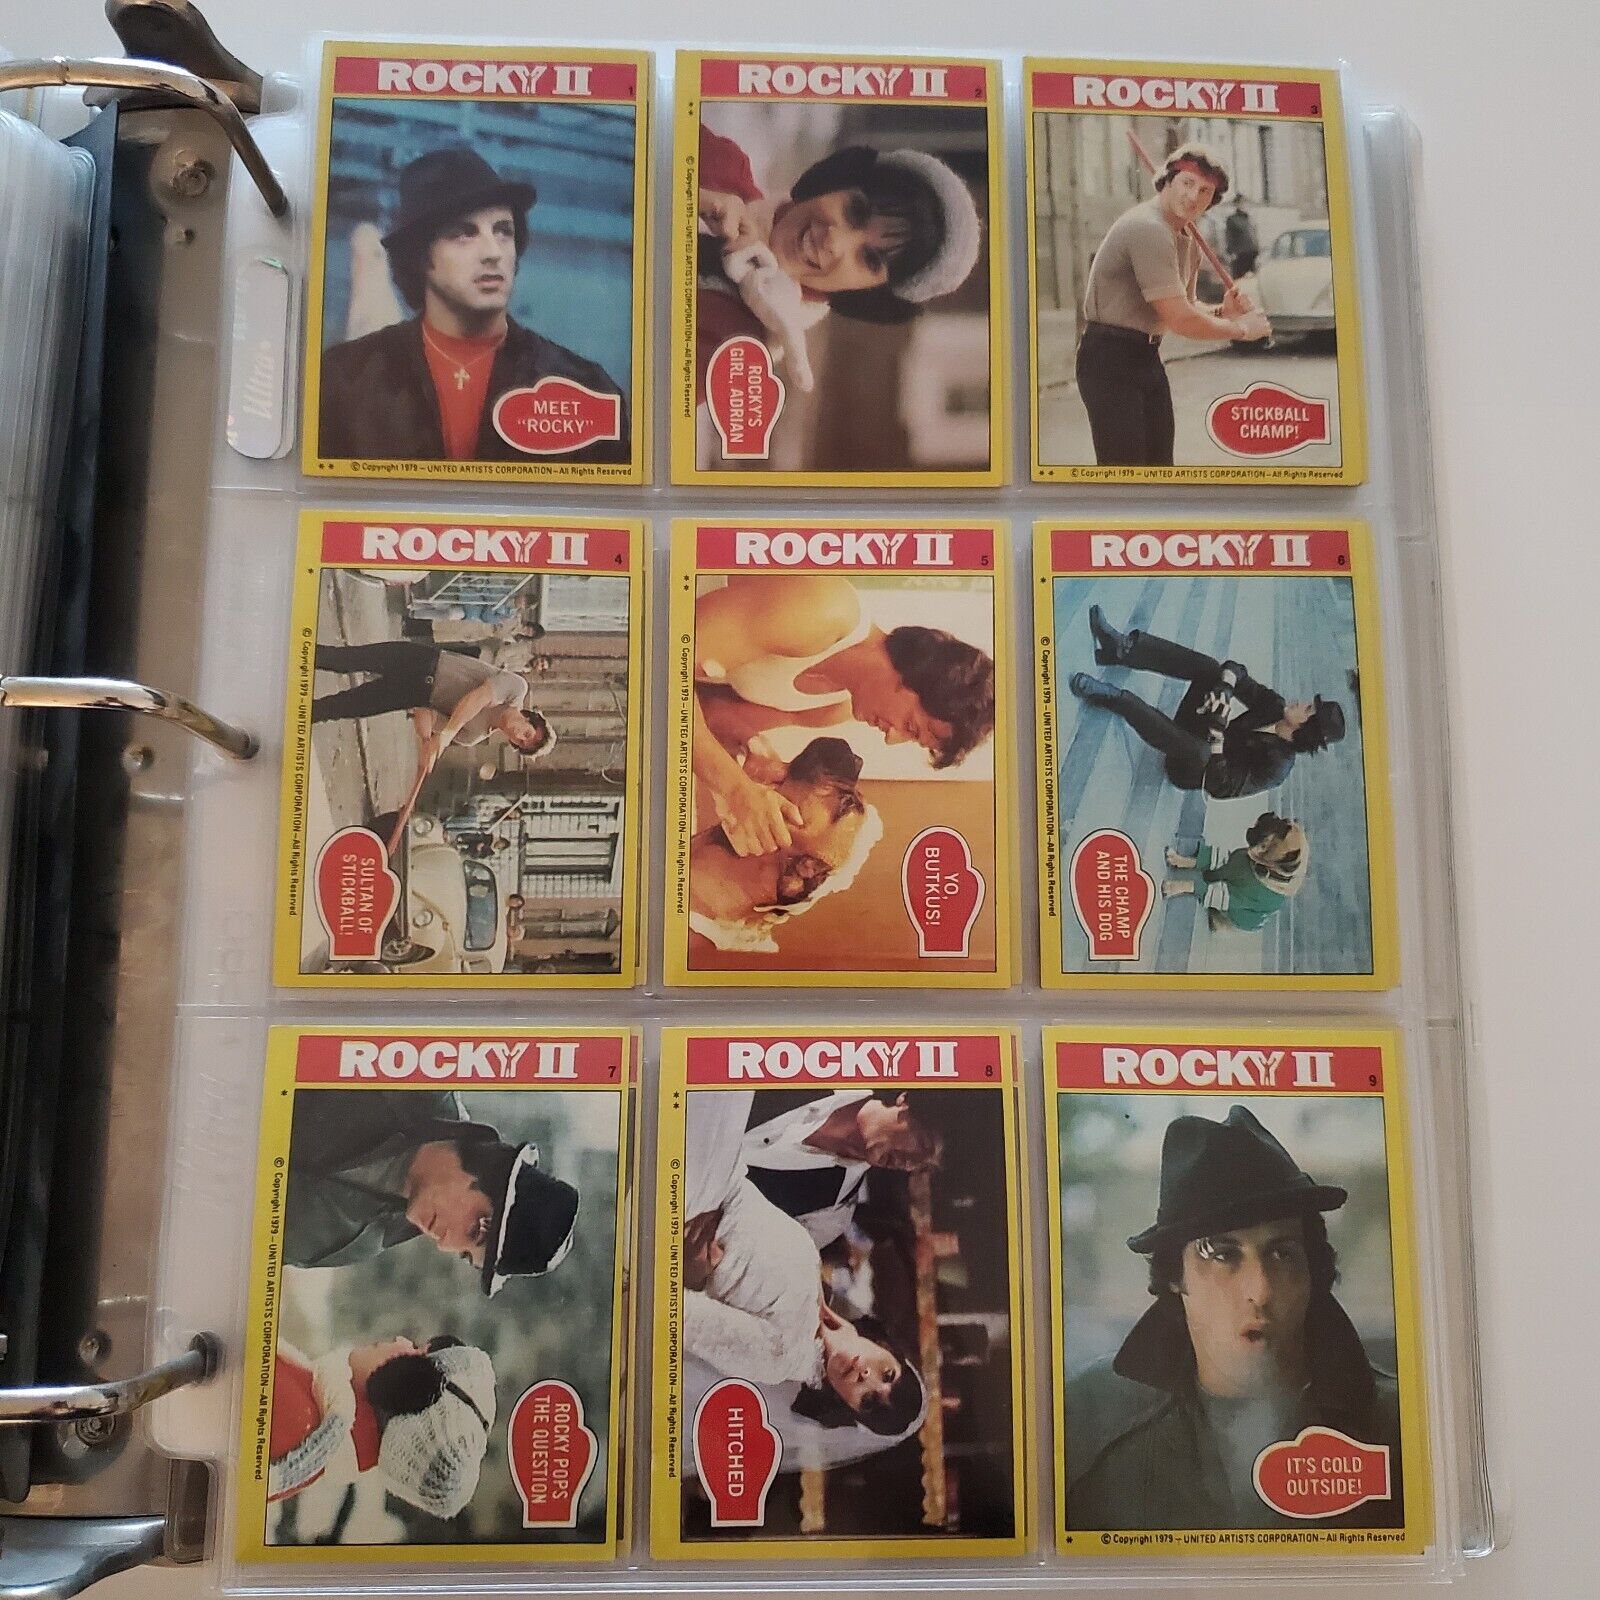 1979 Topps Rocky II Movie Complete Set Vintage Trading Cards (99) W/ Stickers 22